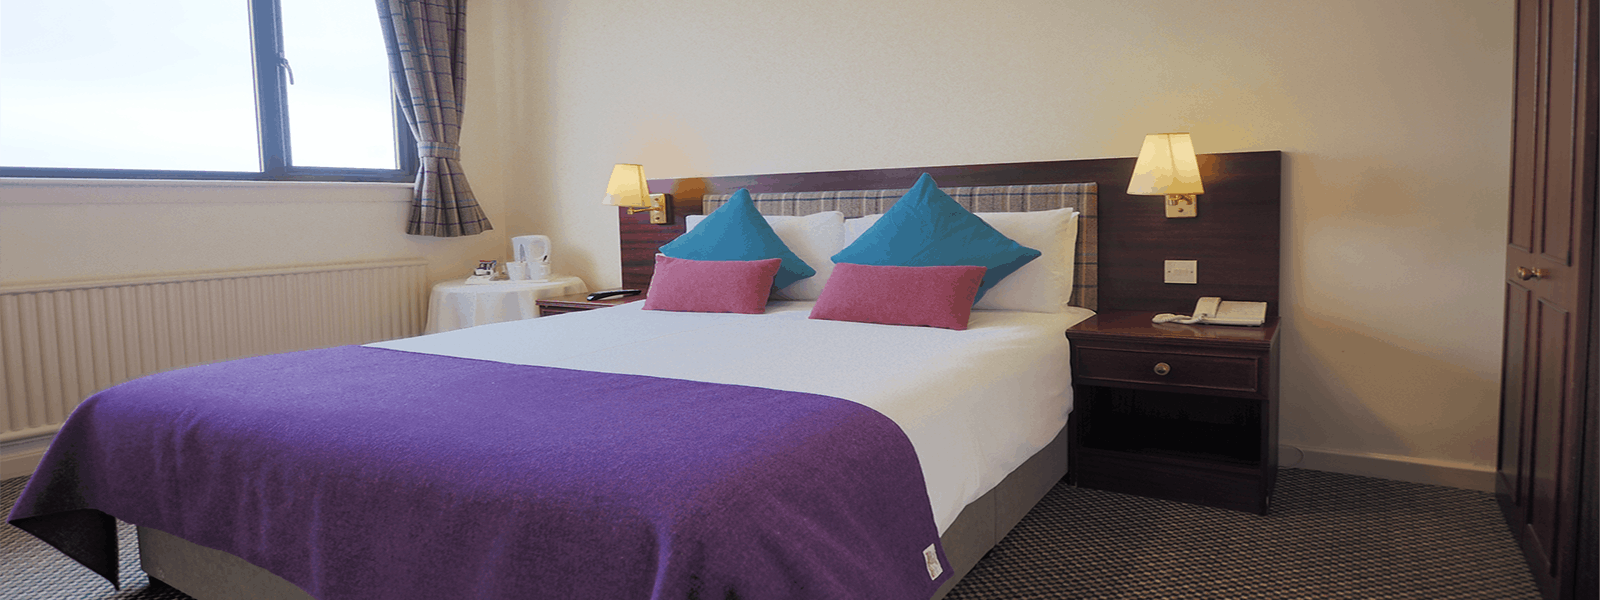 Double bed in the Caladh Inn hotel, Stornoway, Isle of Lewis